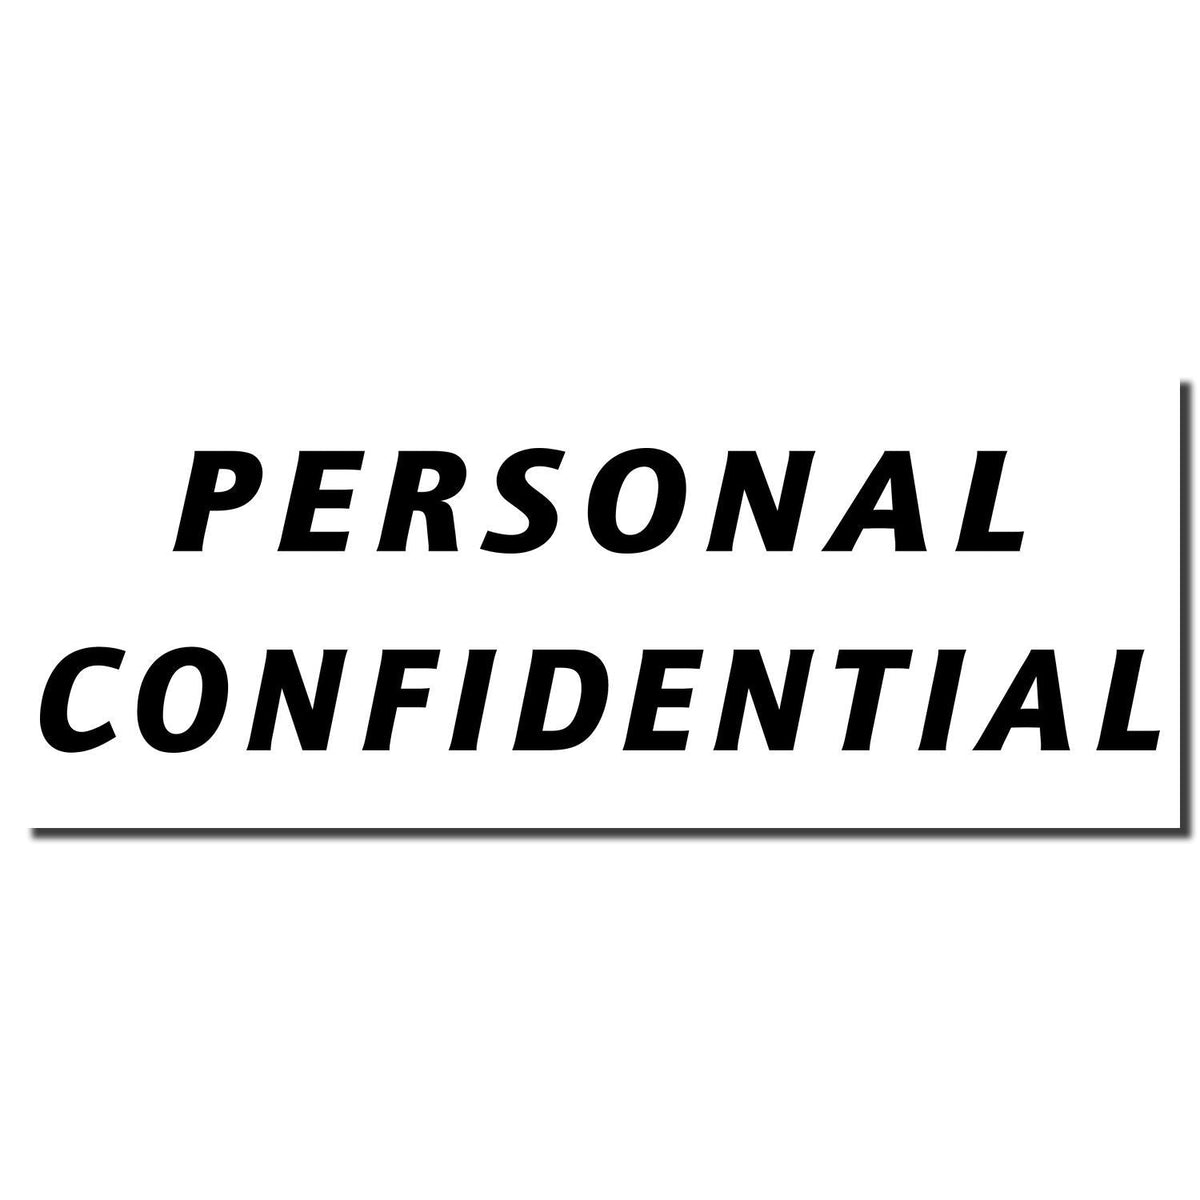 Enlarged Imprint Self-Inking Italic Personal Confidential Stamp Sample